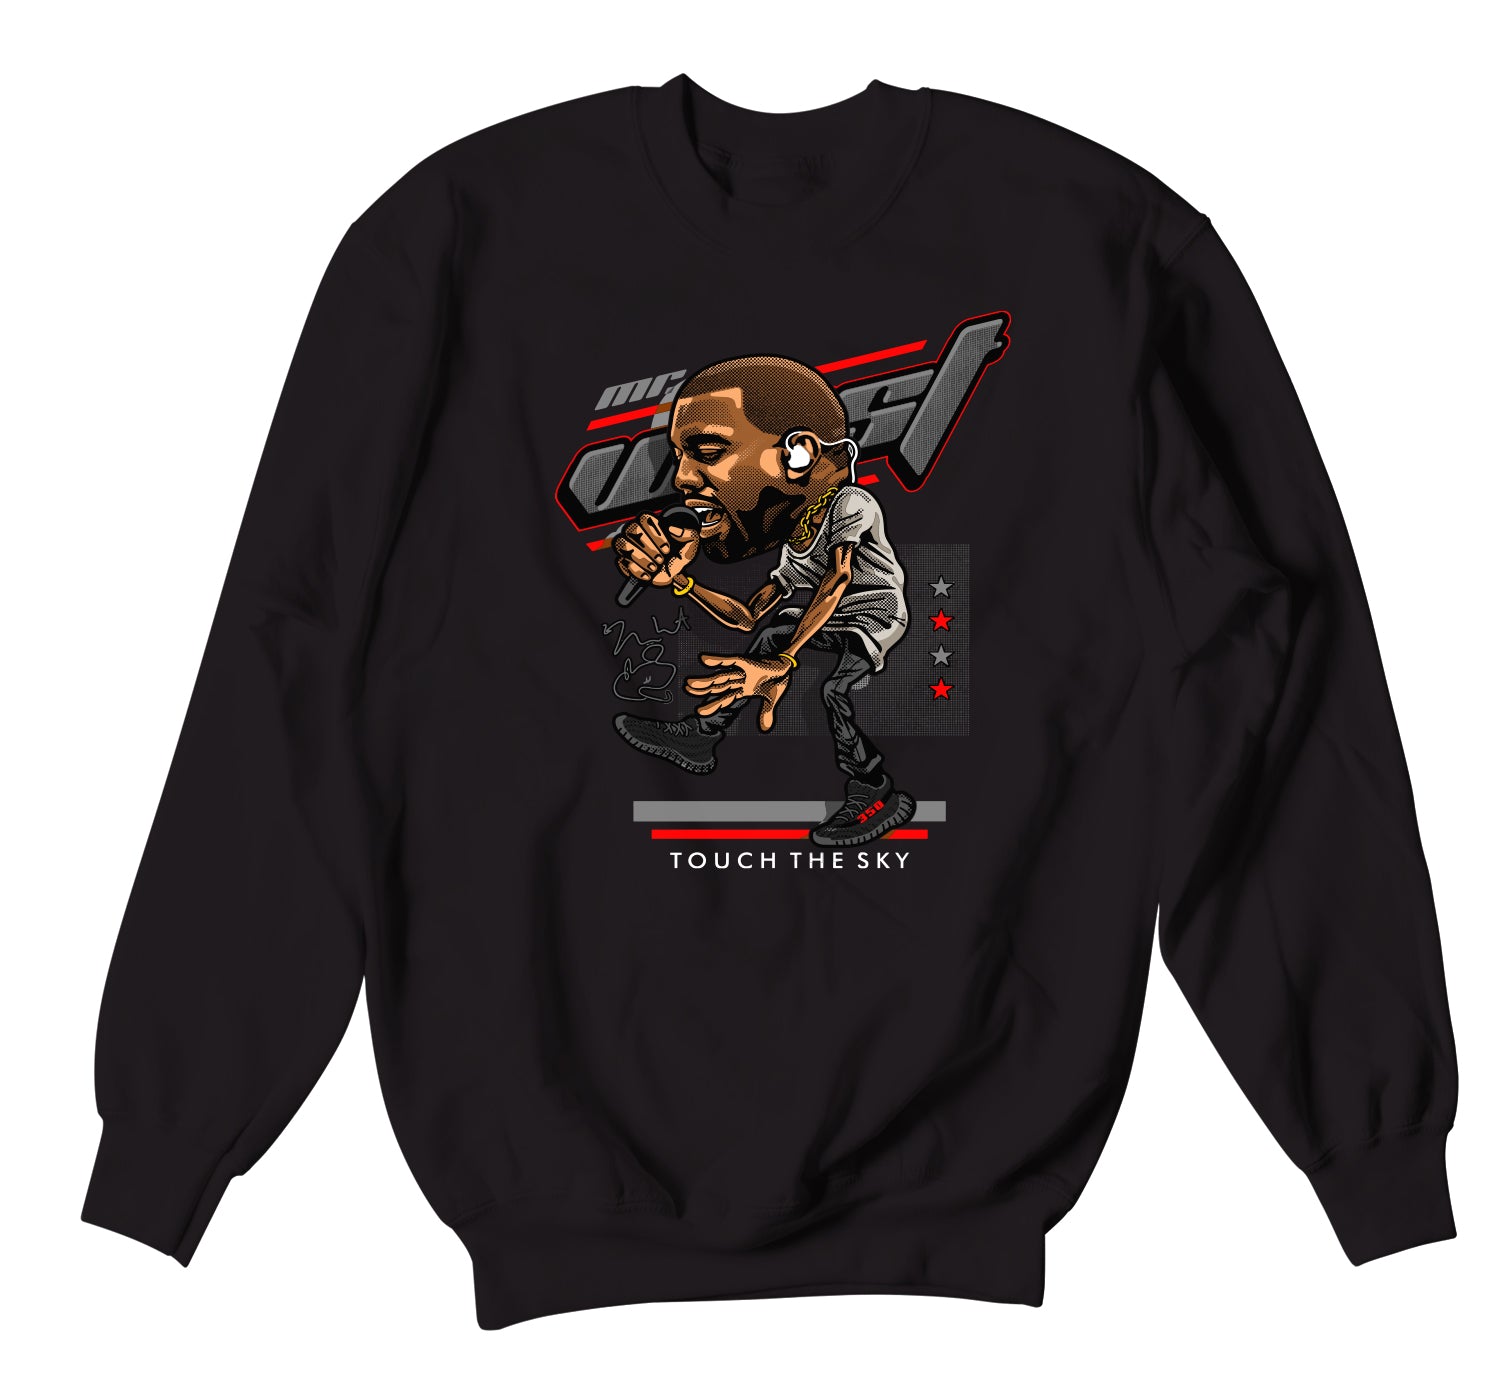 Bred 350 Sweater - Touch The Sky - Black